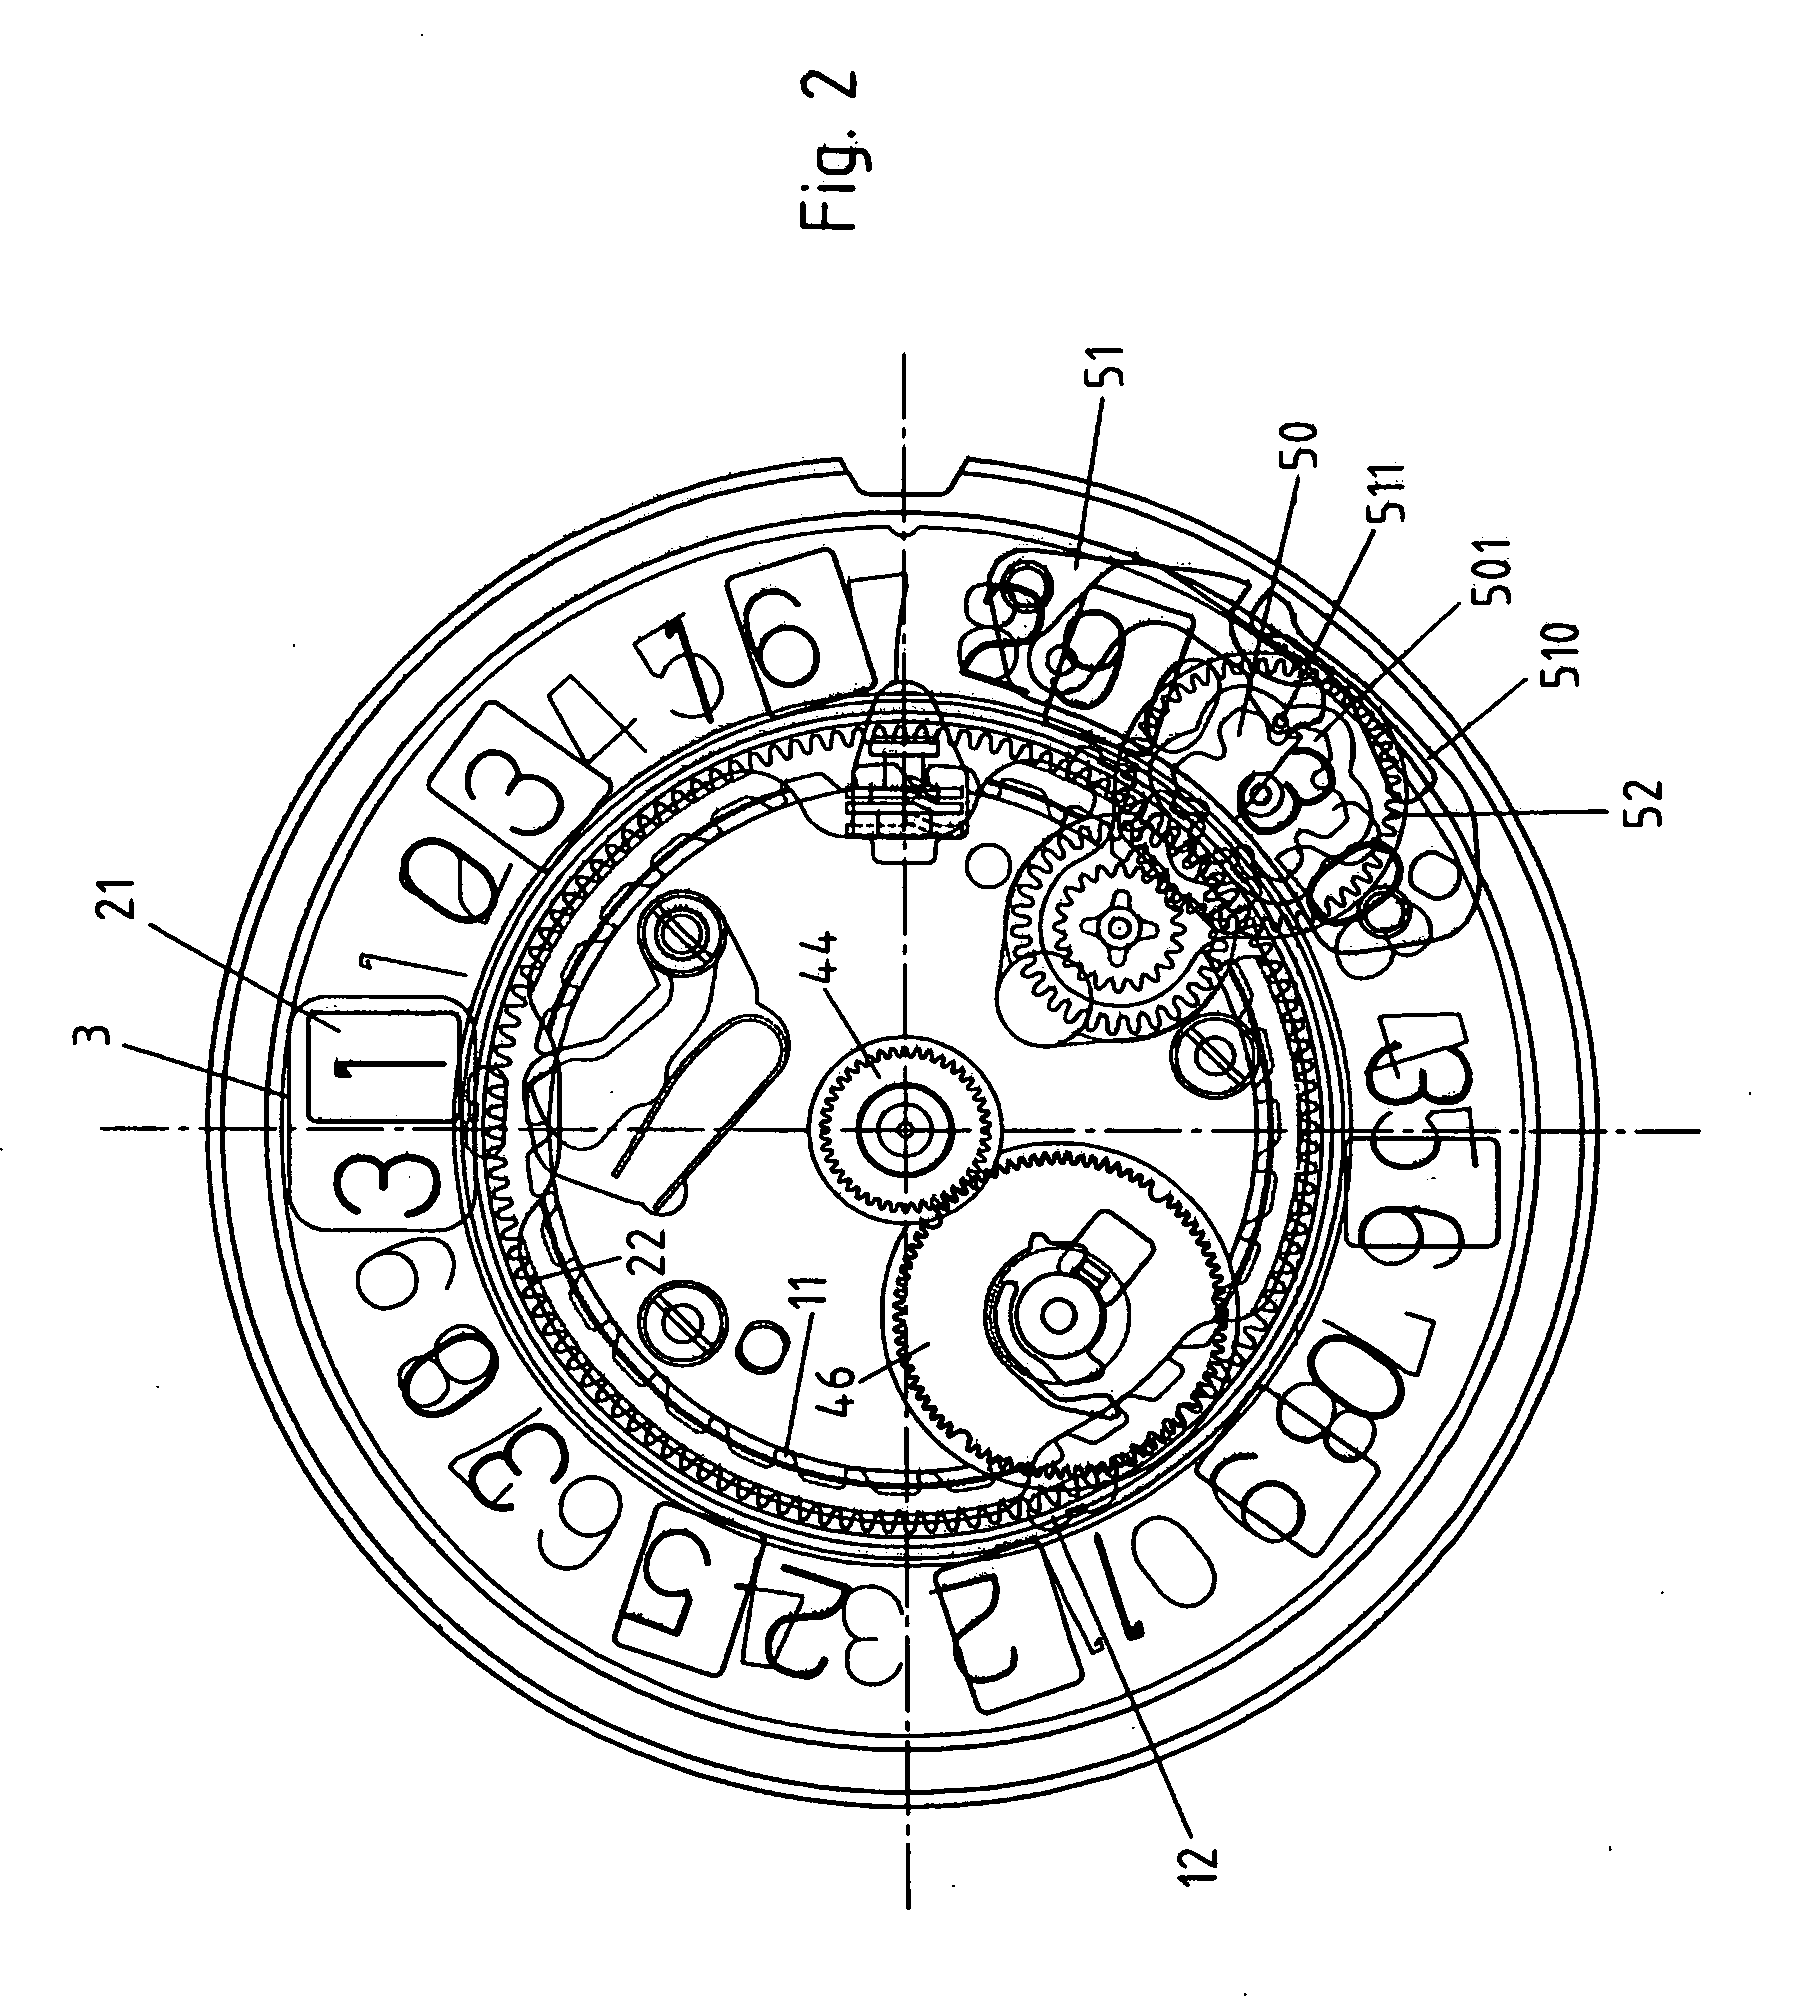 Day of the month display mechanism for watch movement